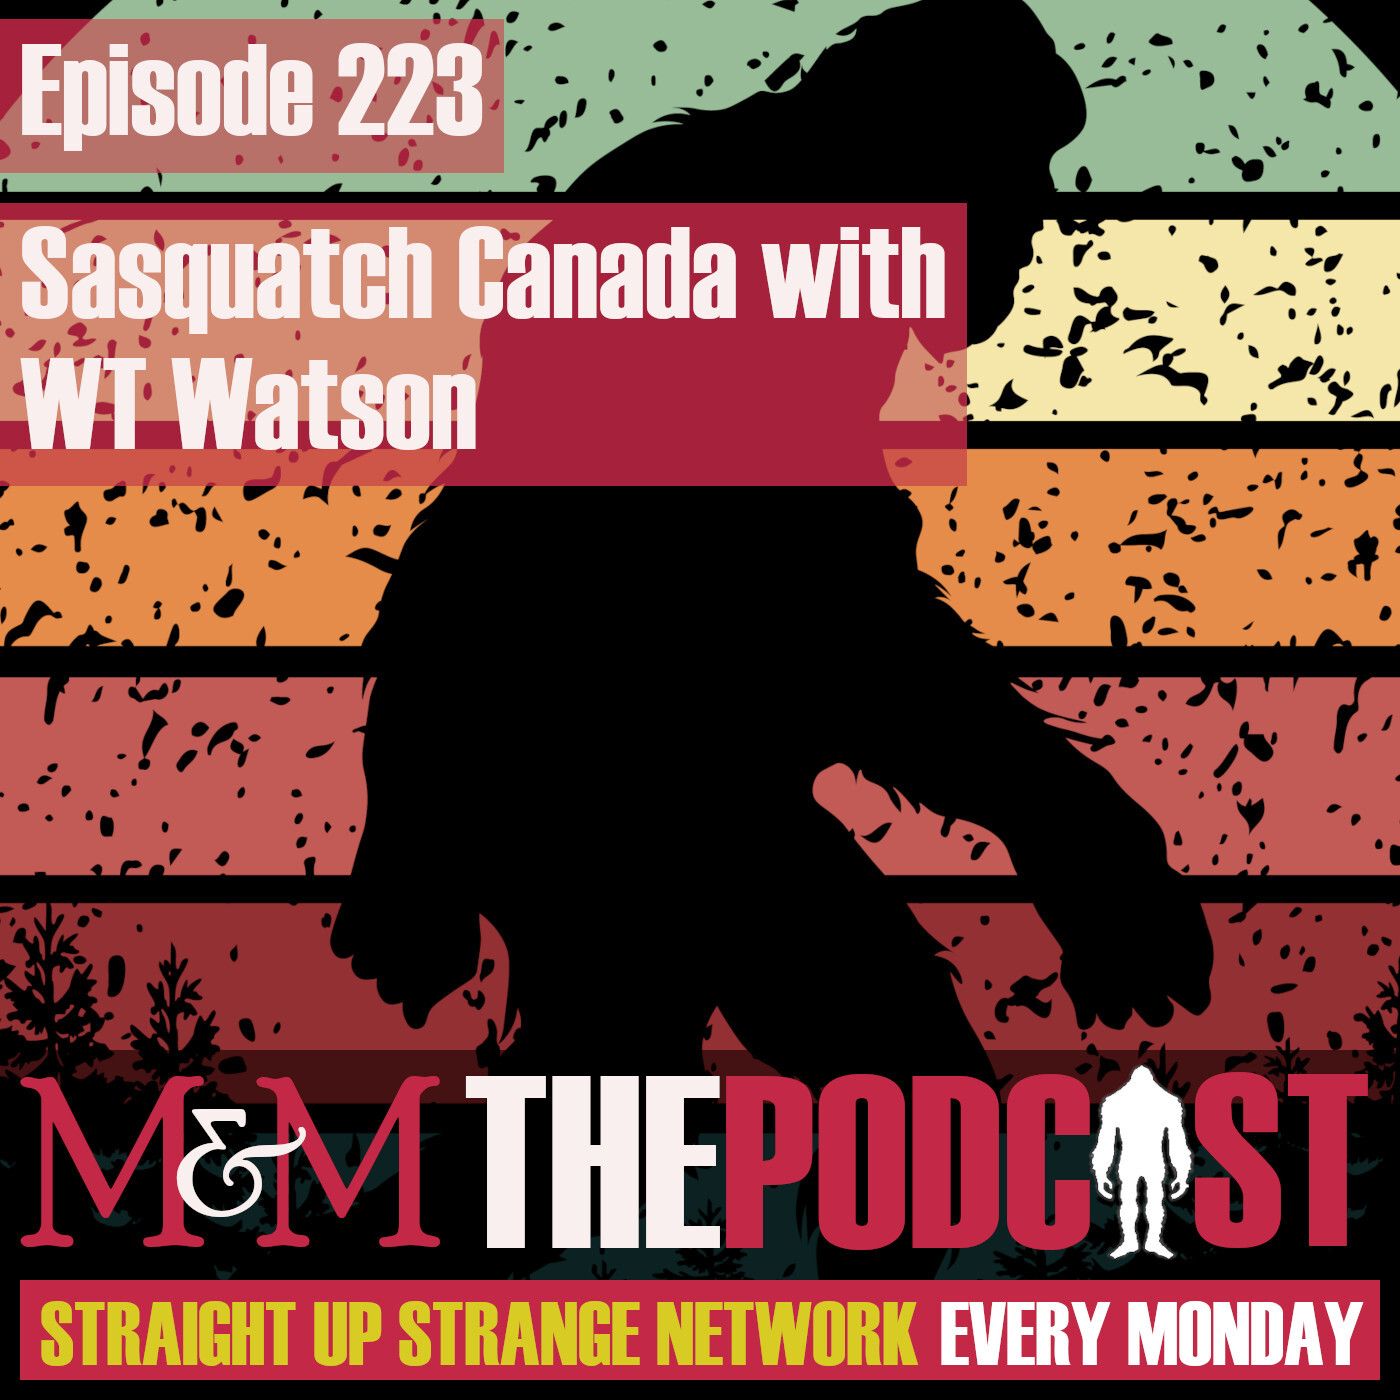 Mysteries and Monsters: Episode 223 Sasquatch Canada with W T Watson